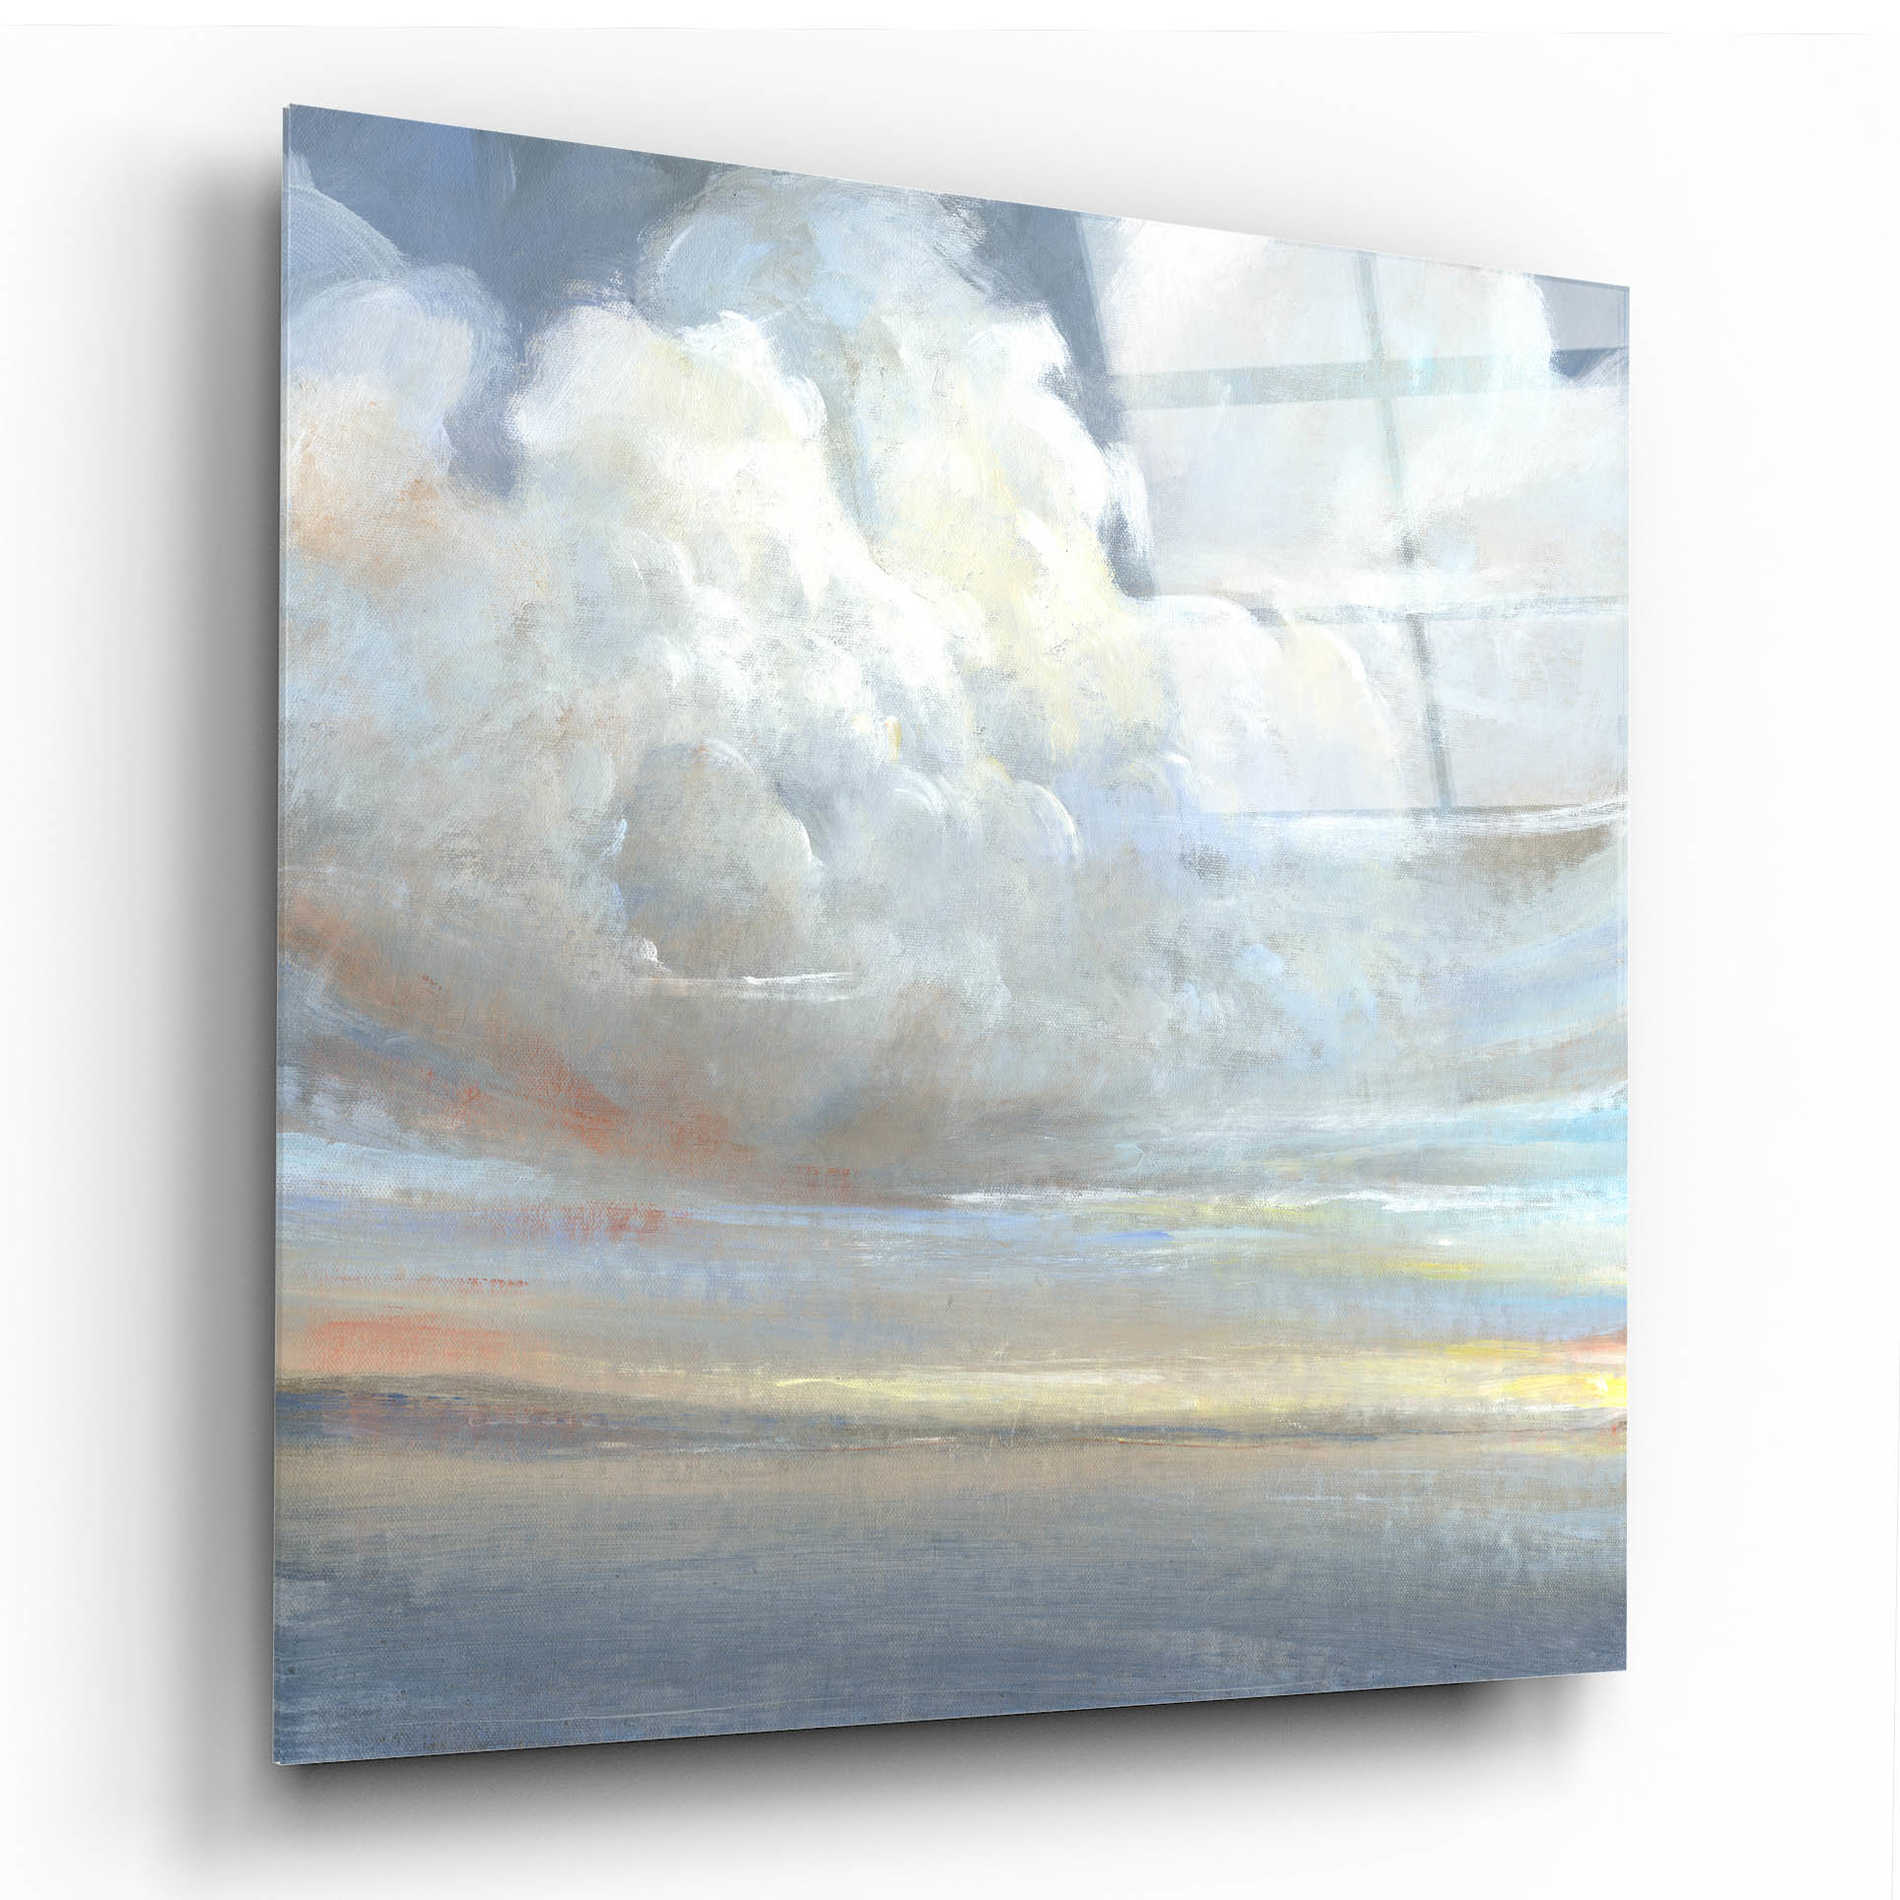 Epic Art 'Passing Storm II' by Tim O'Toole, Acrylic Glass Wall Art,24x24